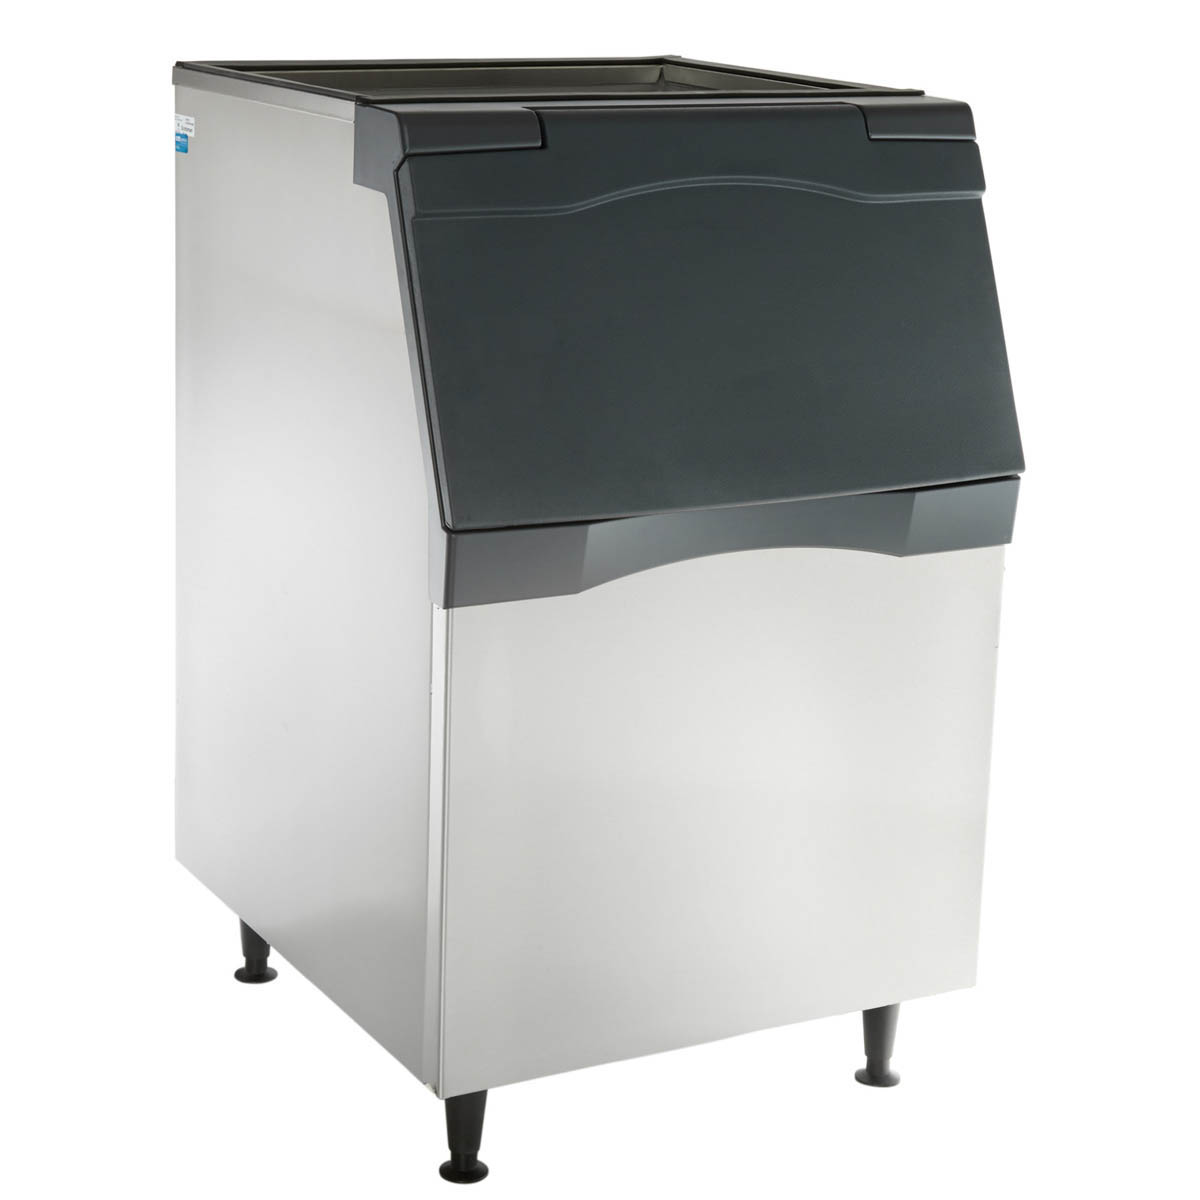 With Scotsman B530S Is An Effective Way To Keep Your Ice Supply Cool and Available, Chef's Deal